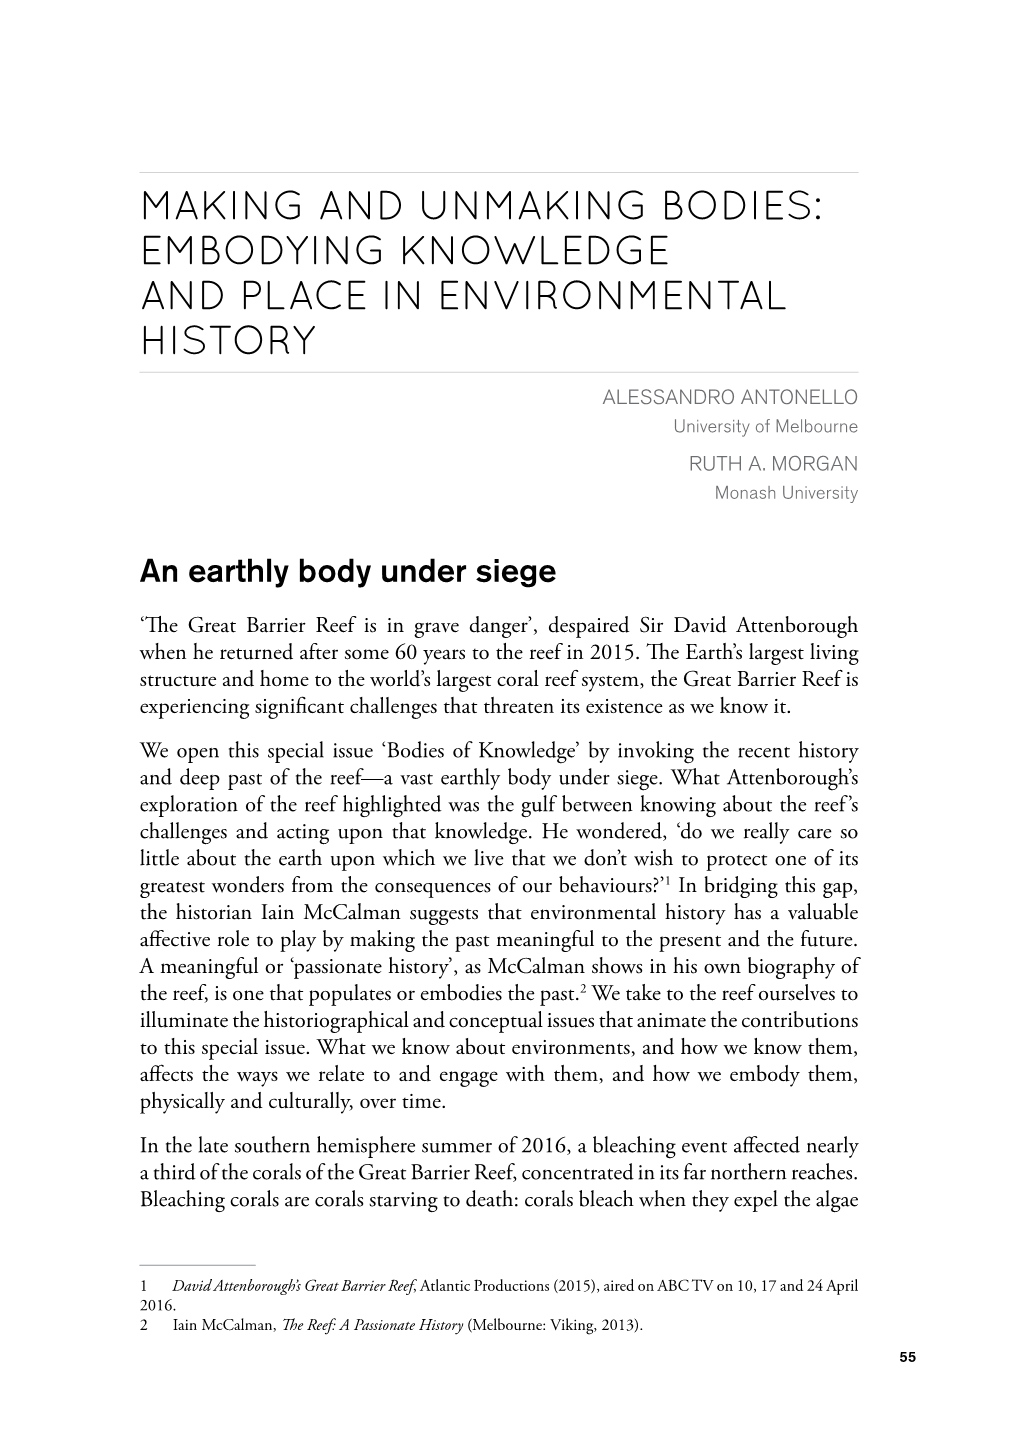 Embodying Knowledge and Place in Environmental History